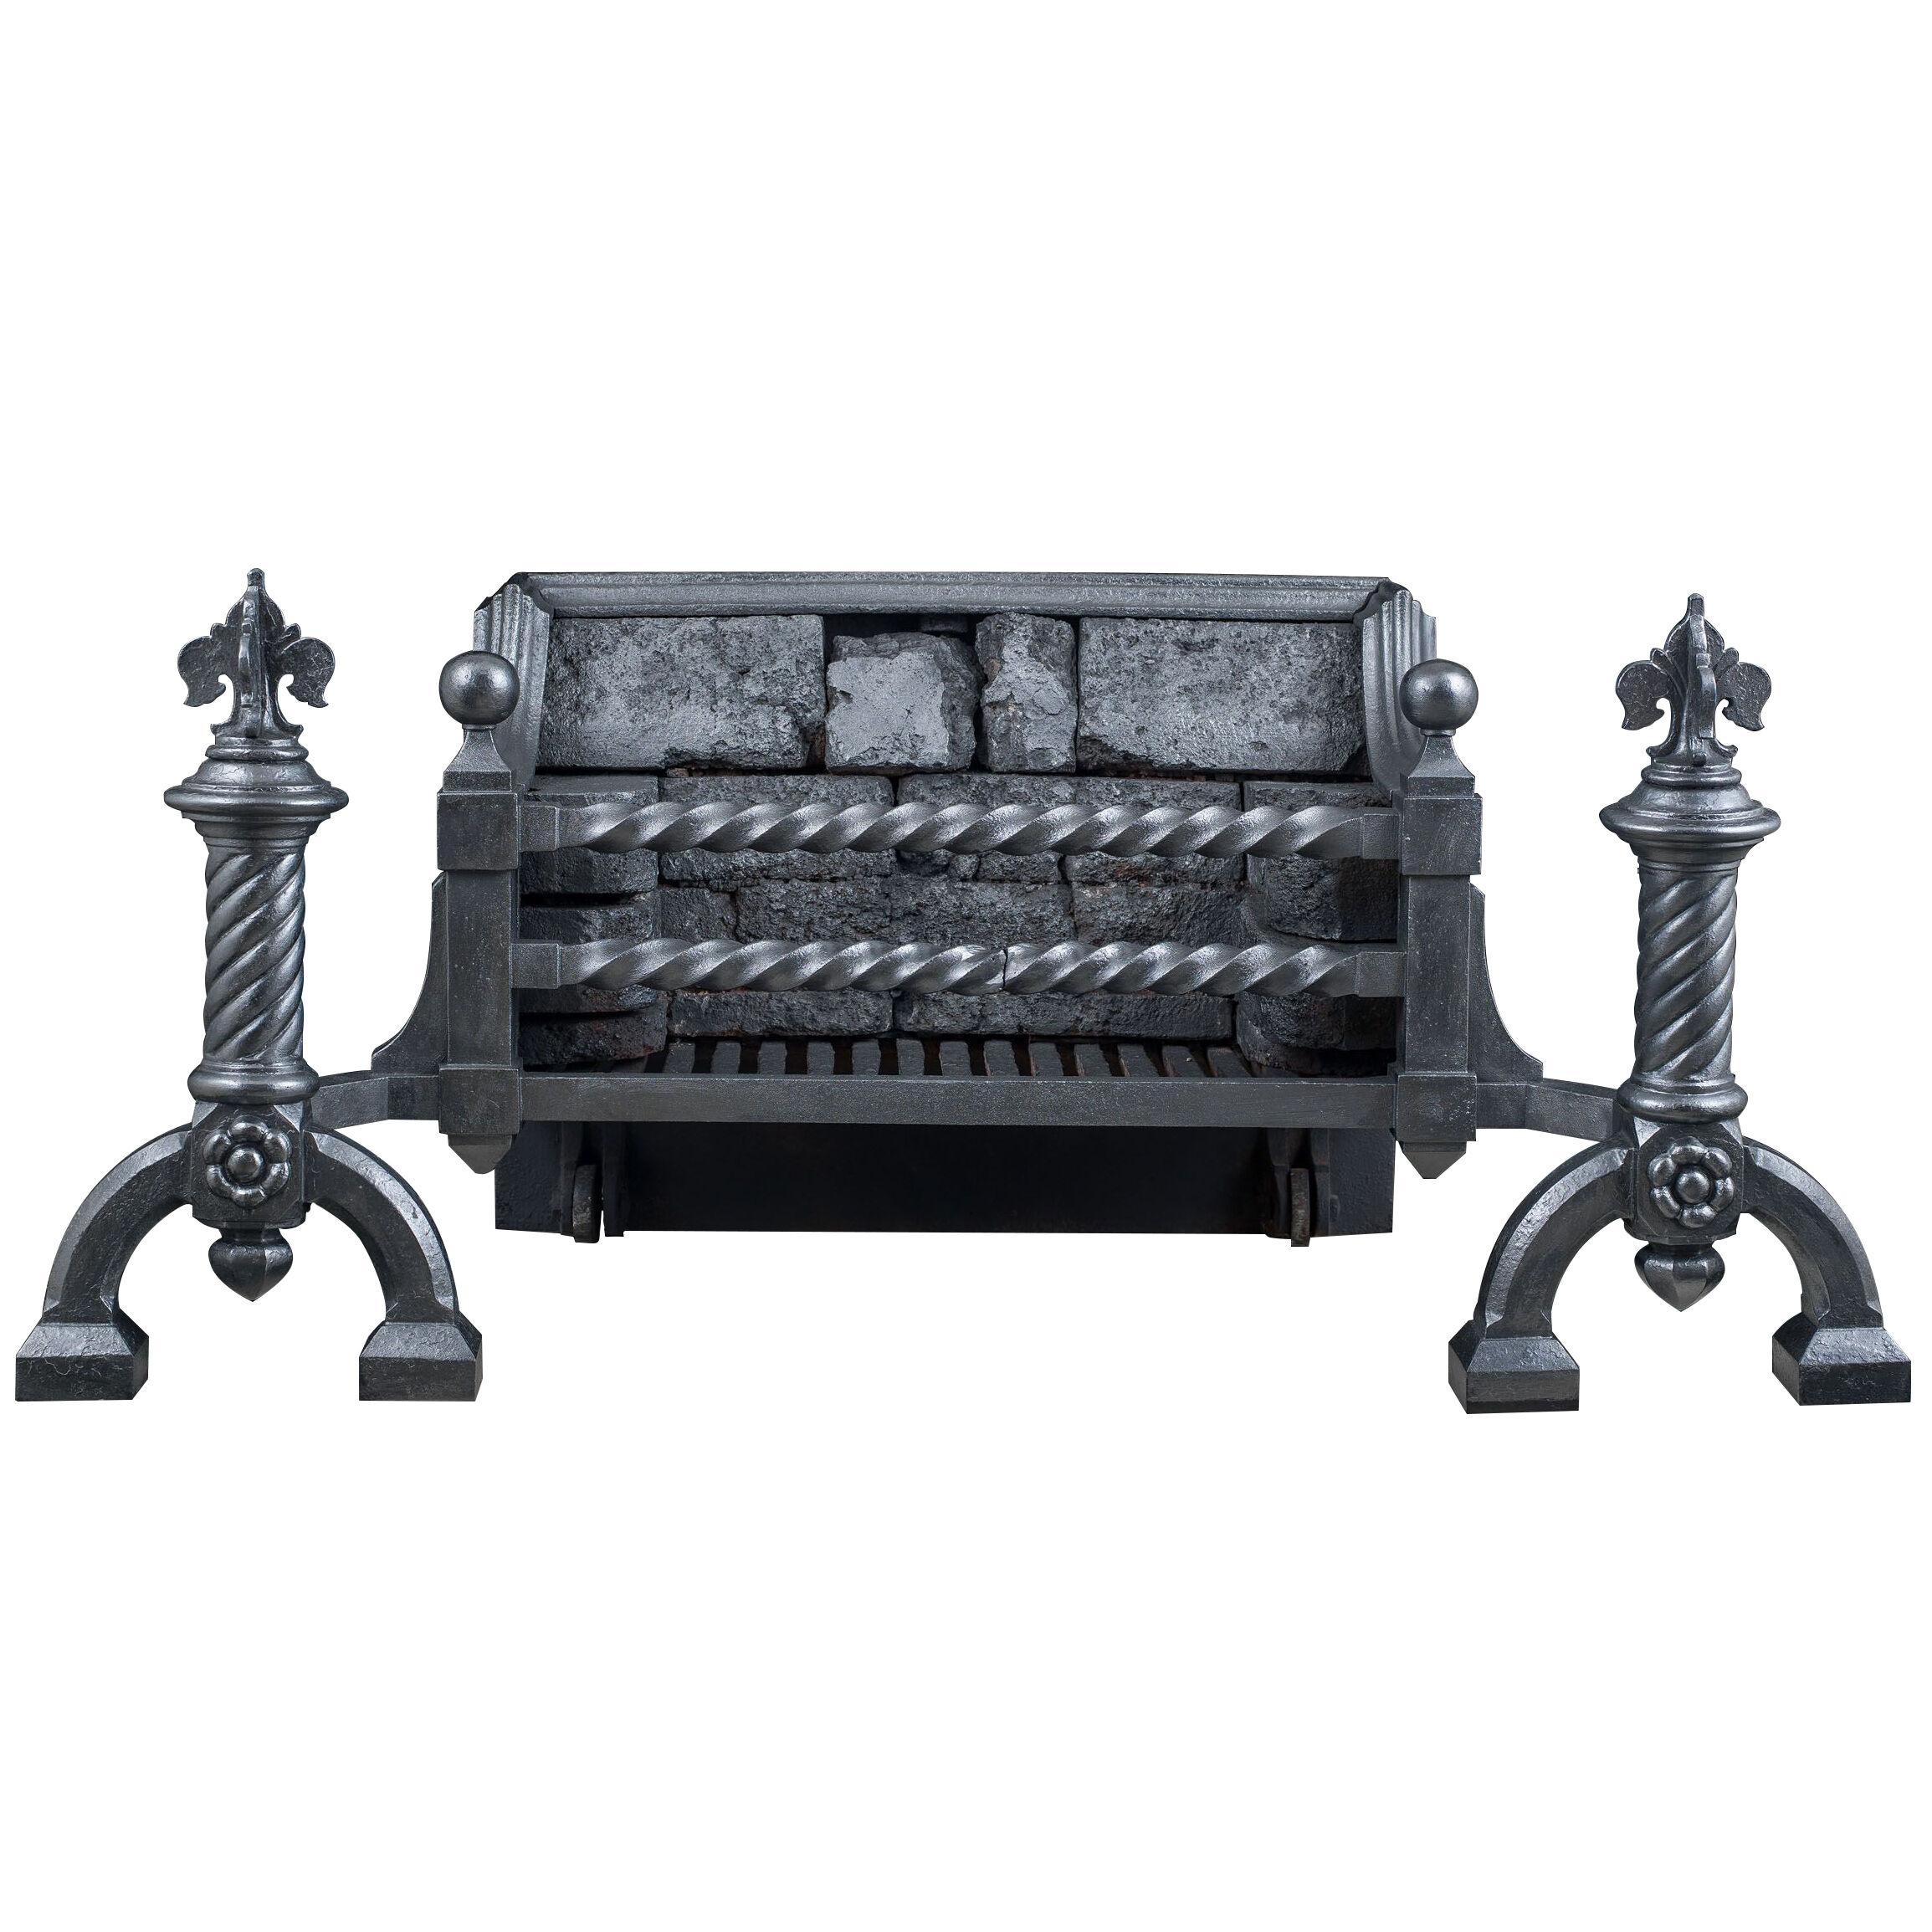 A large cast iron Gothic Revival fire grate